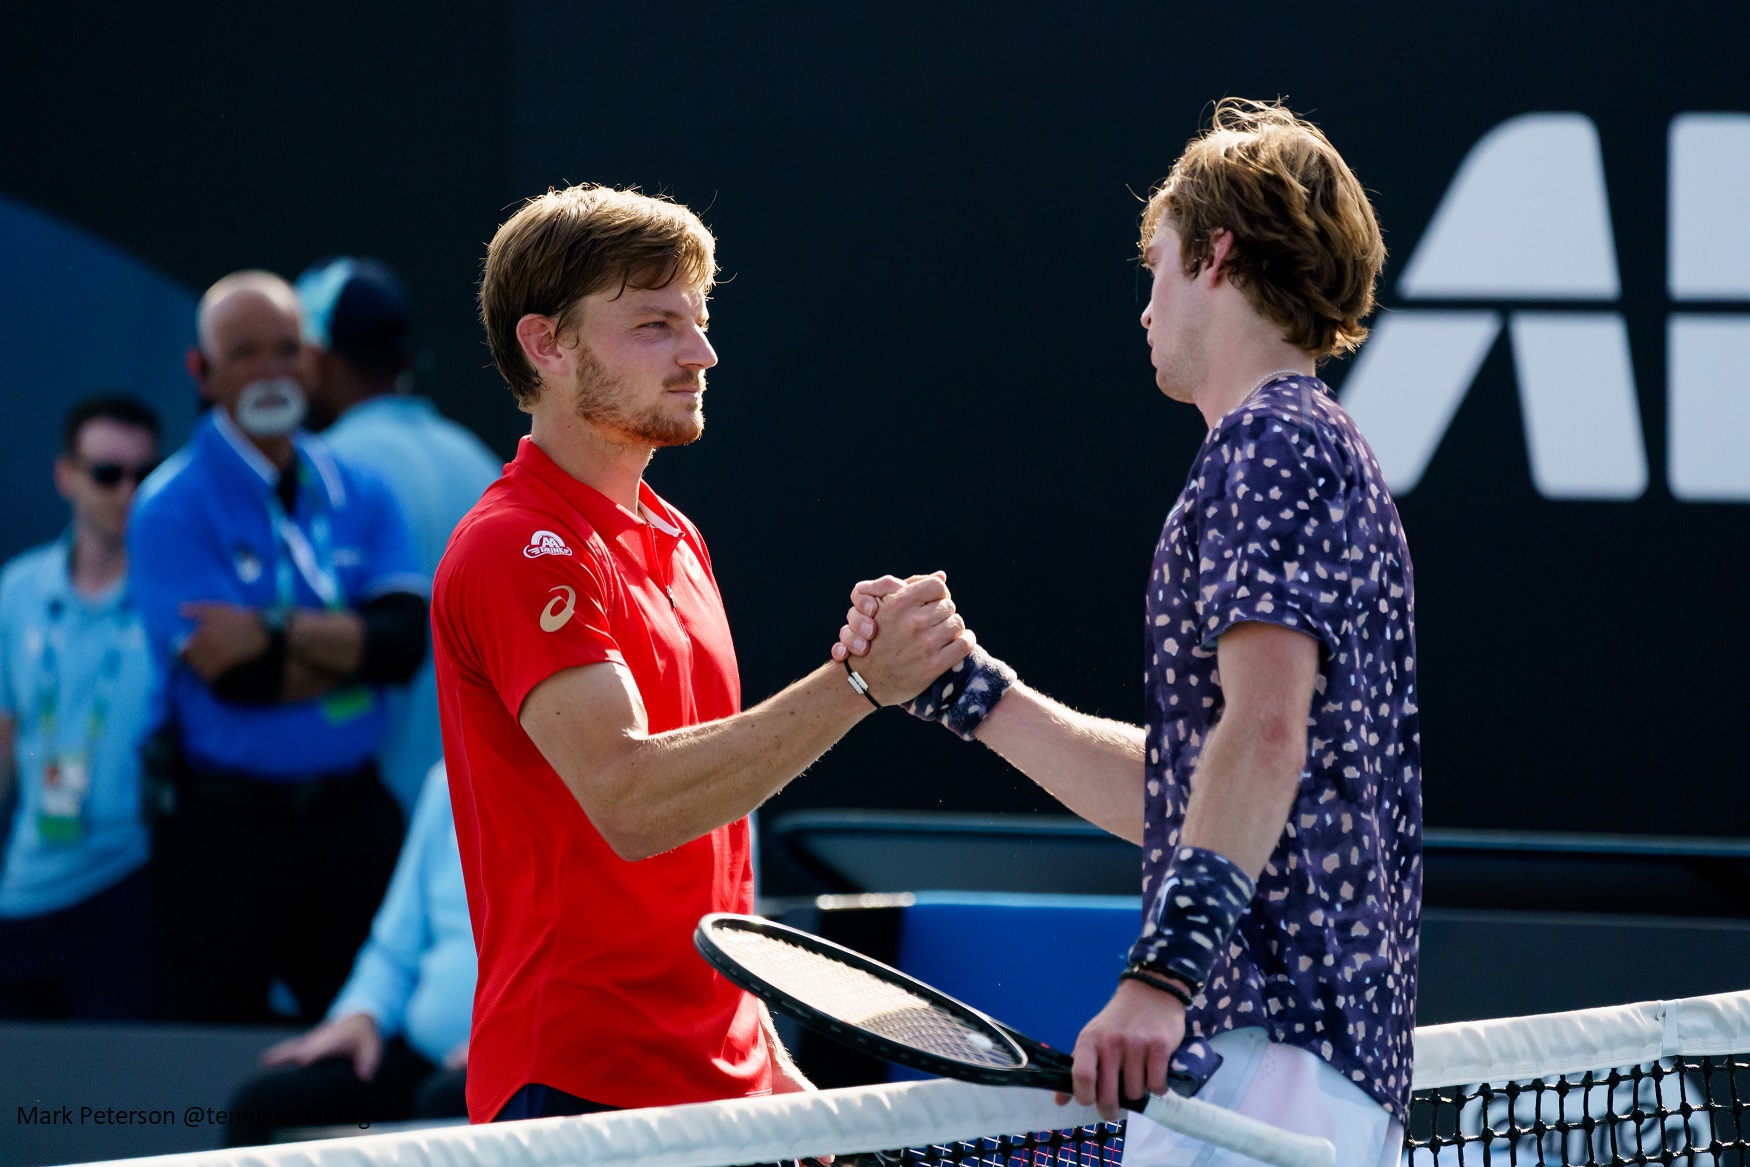 Goffin and Rublev